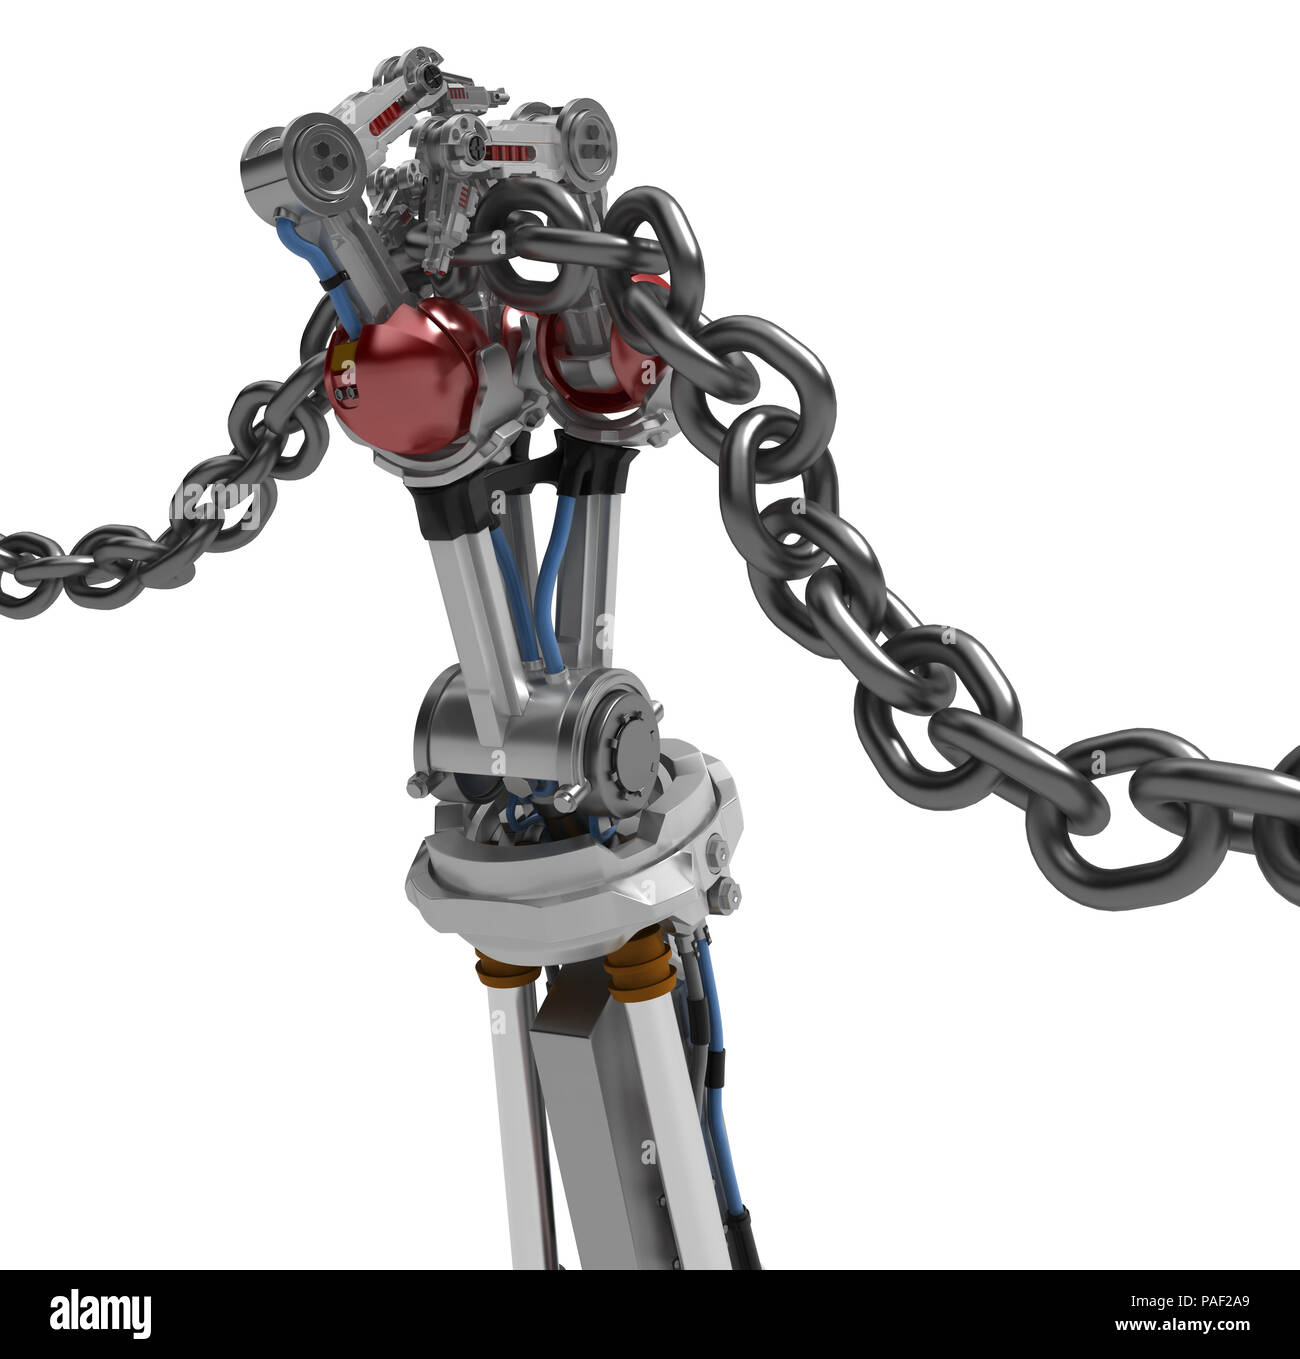 Robotic arm with three fingers, chain grip, 3d illustration, horizontal, over white, isolated Stock Photo